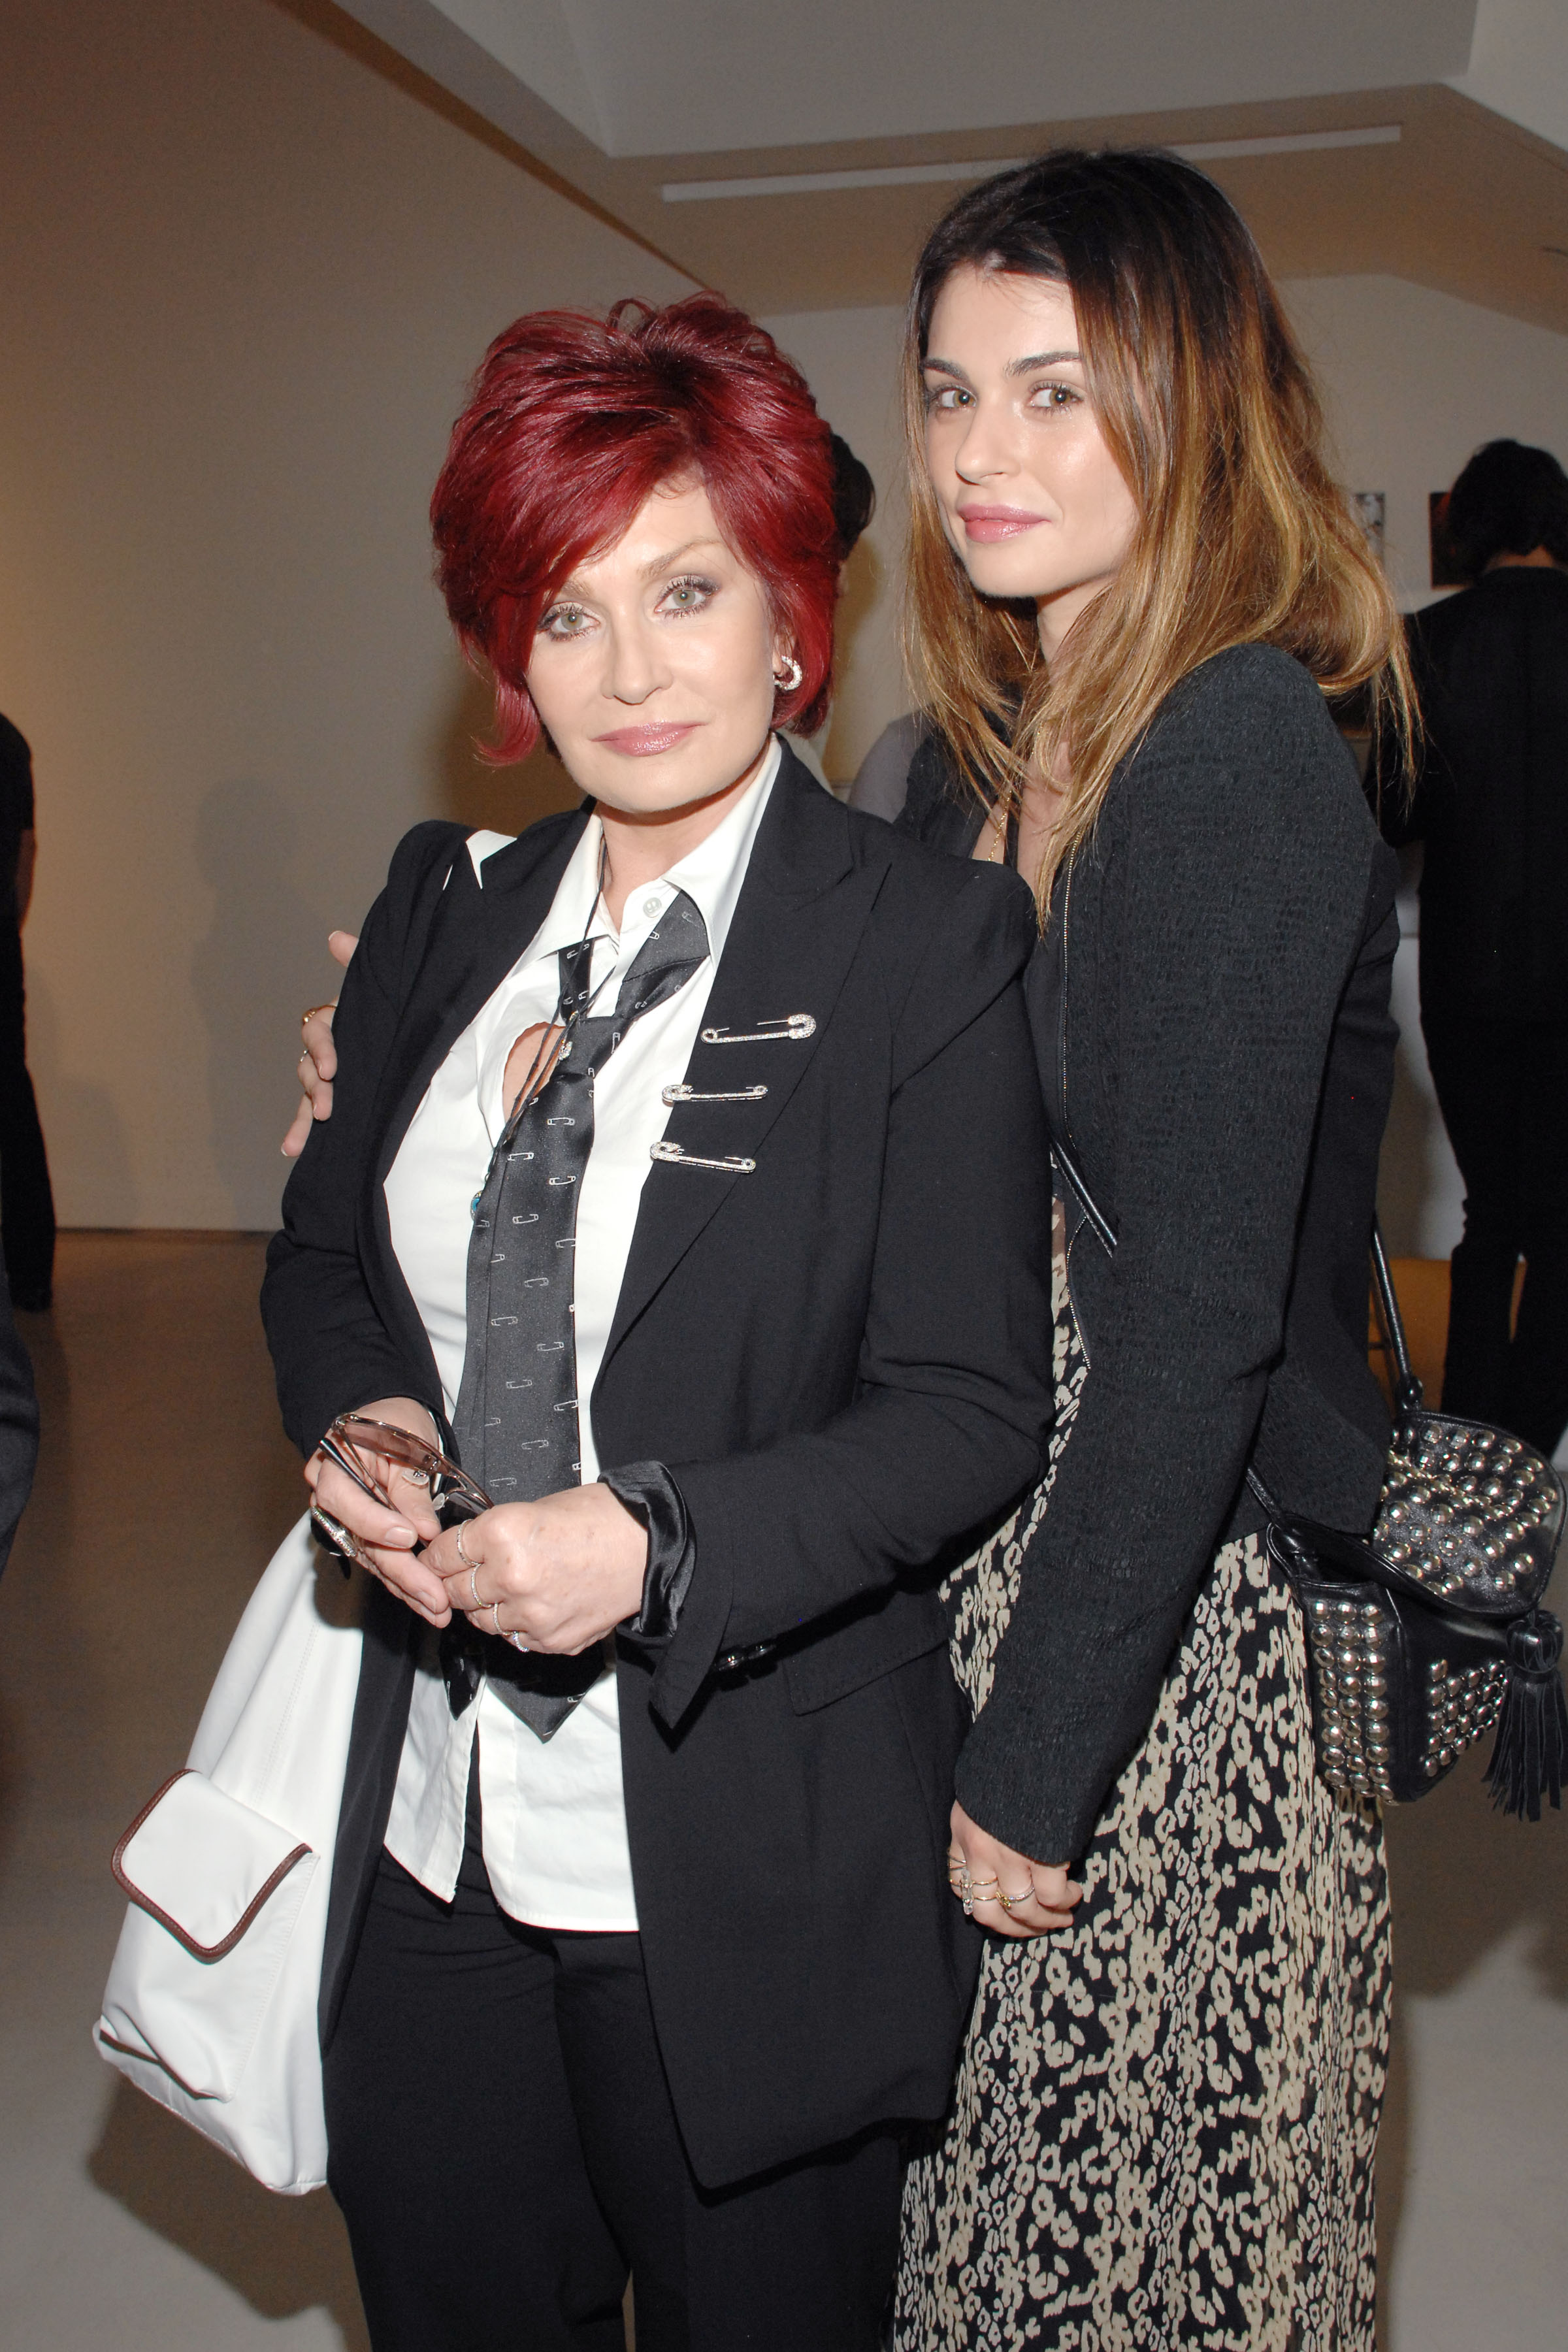 Sharon and Aimee Osbourne attend PRISM : Andy Warhol Black & White on June 4, 2010 in West Hollywood, California | Source: Getty Images